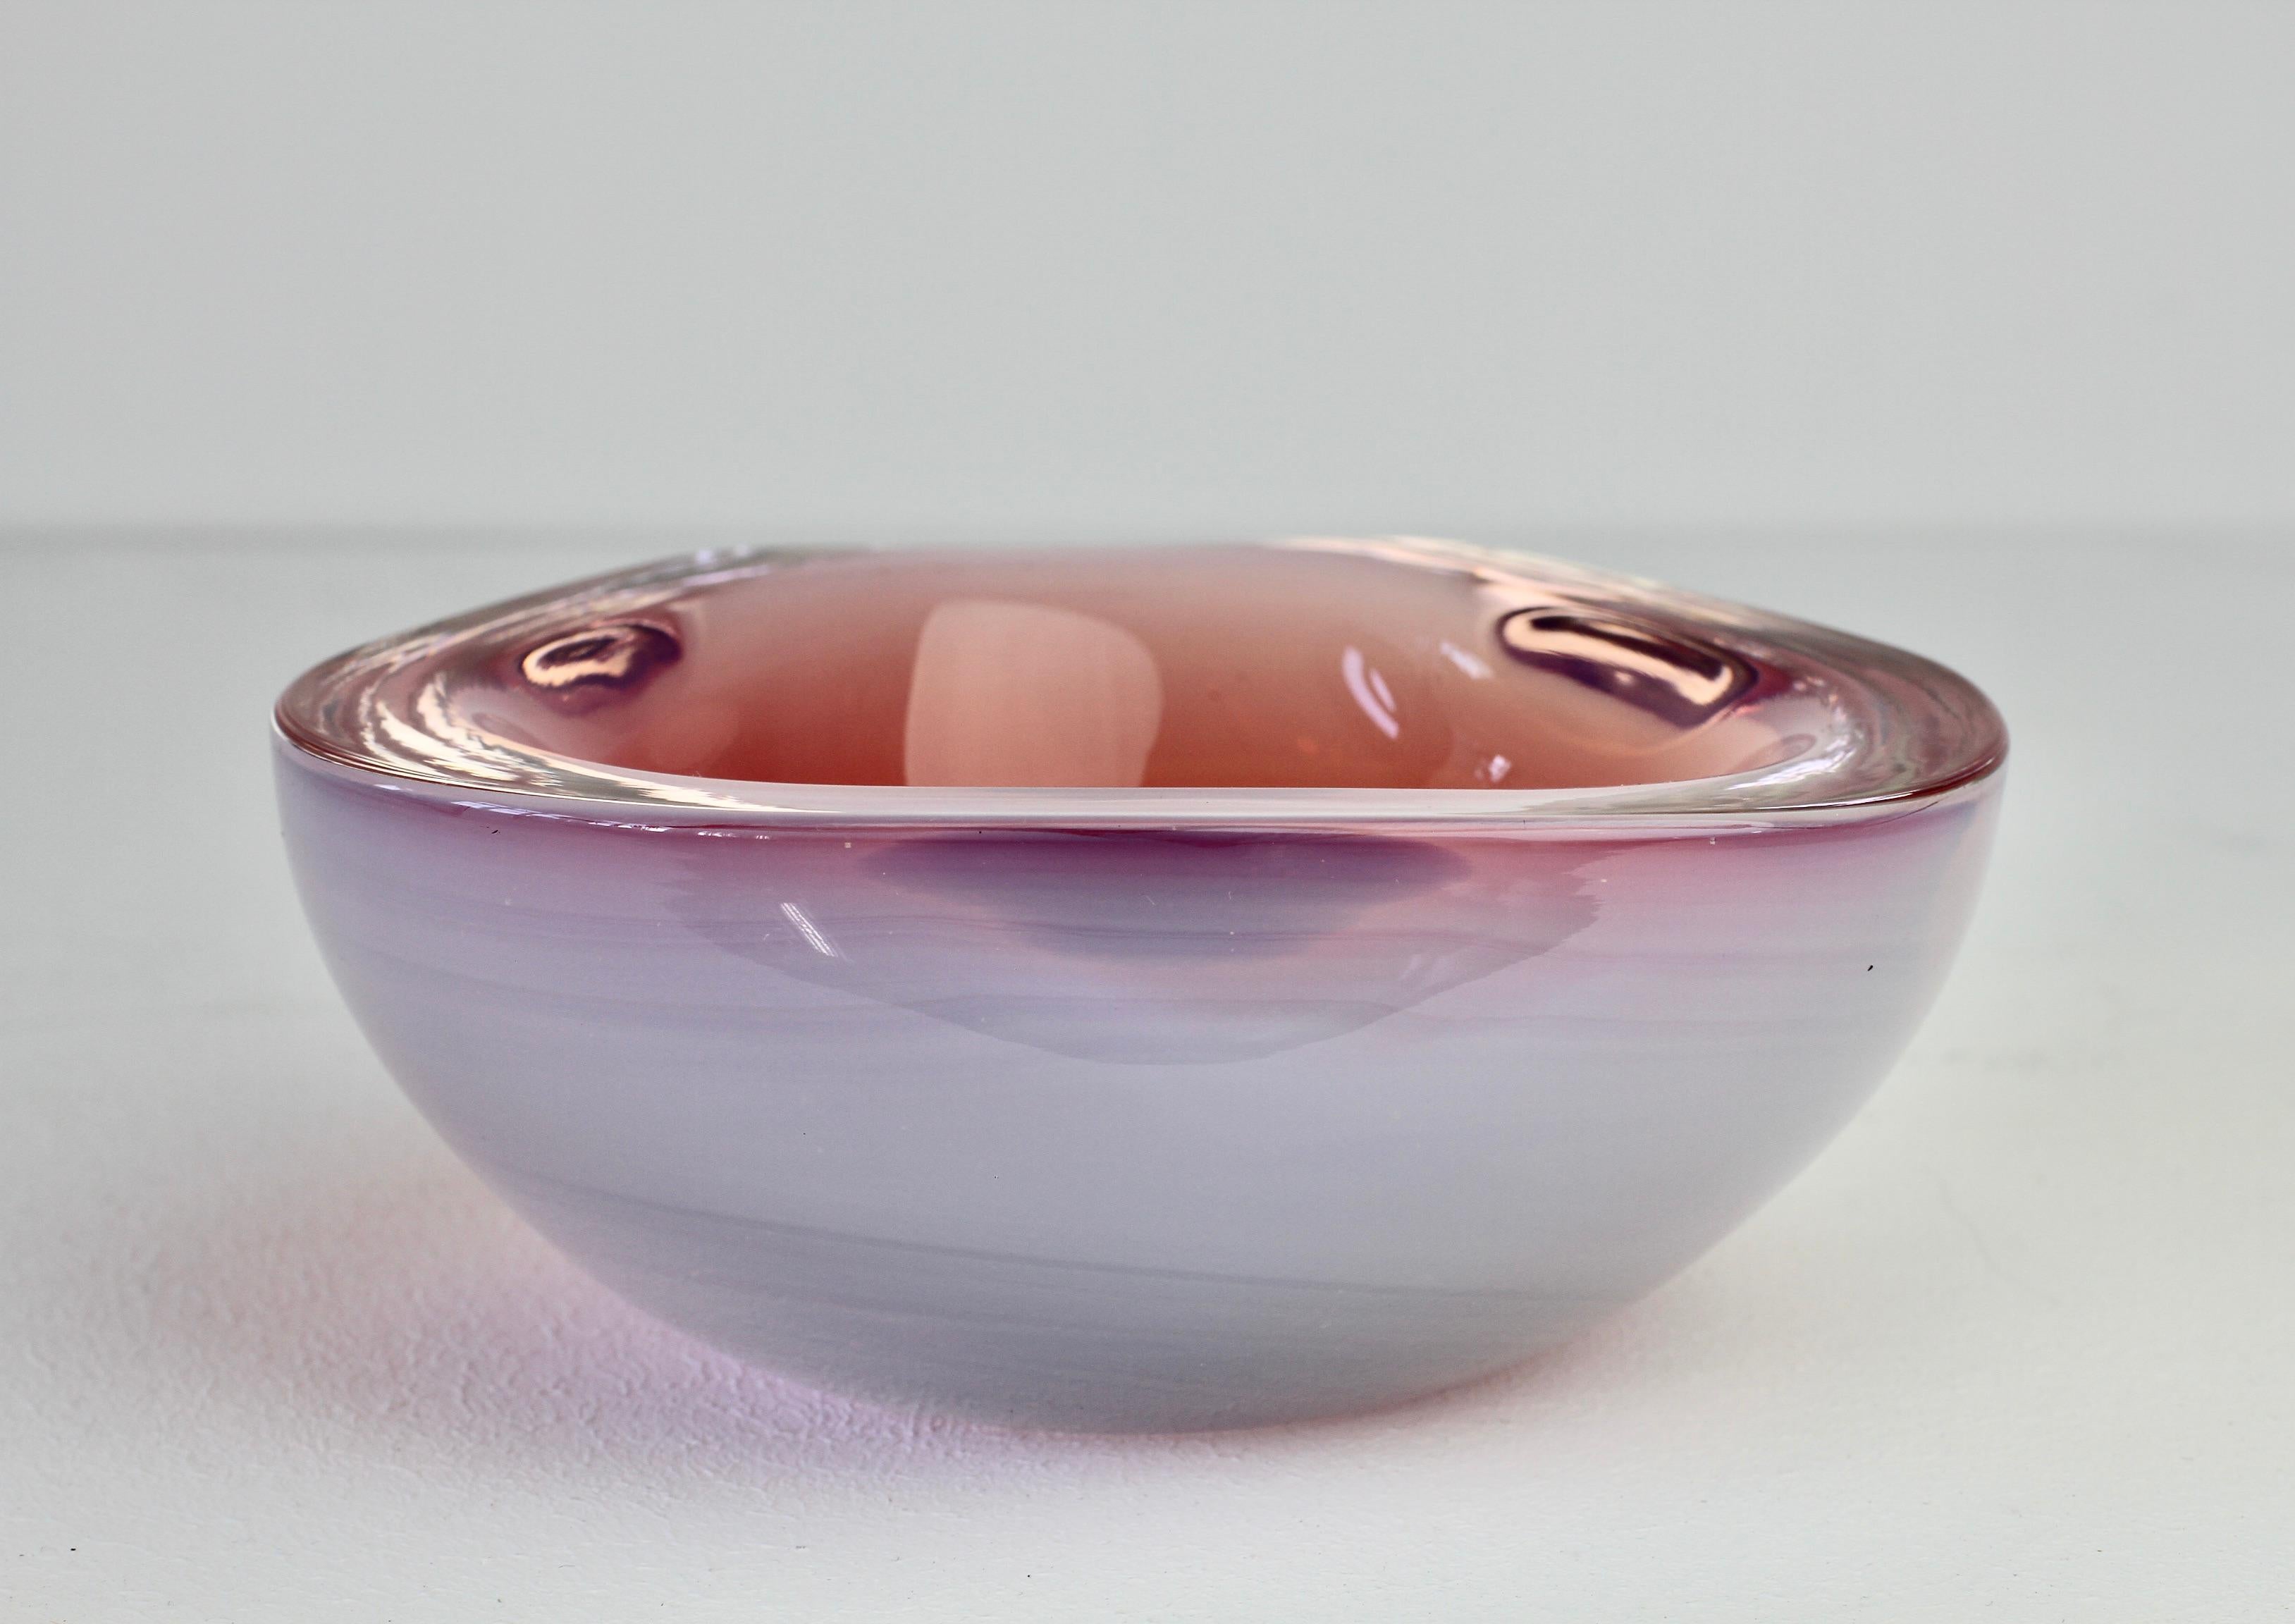 Cenedese vintage Italian Murano glass bowl, serving dish or ashtray, circa 1965-1975. Utilizing the Sommerso technique this large, heavy piece of glass features a triangular design of opaline white over pink toned glass to create a stunning centre